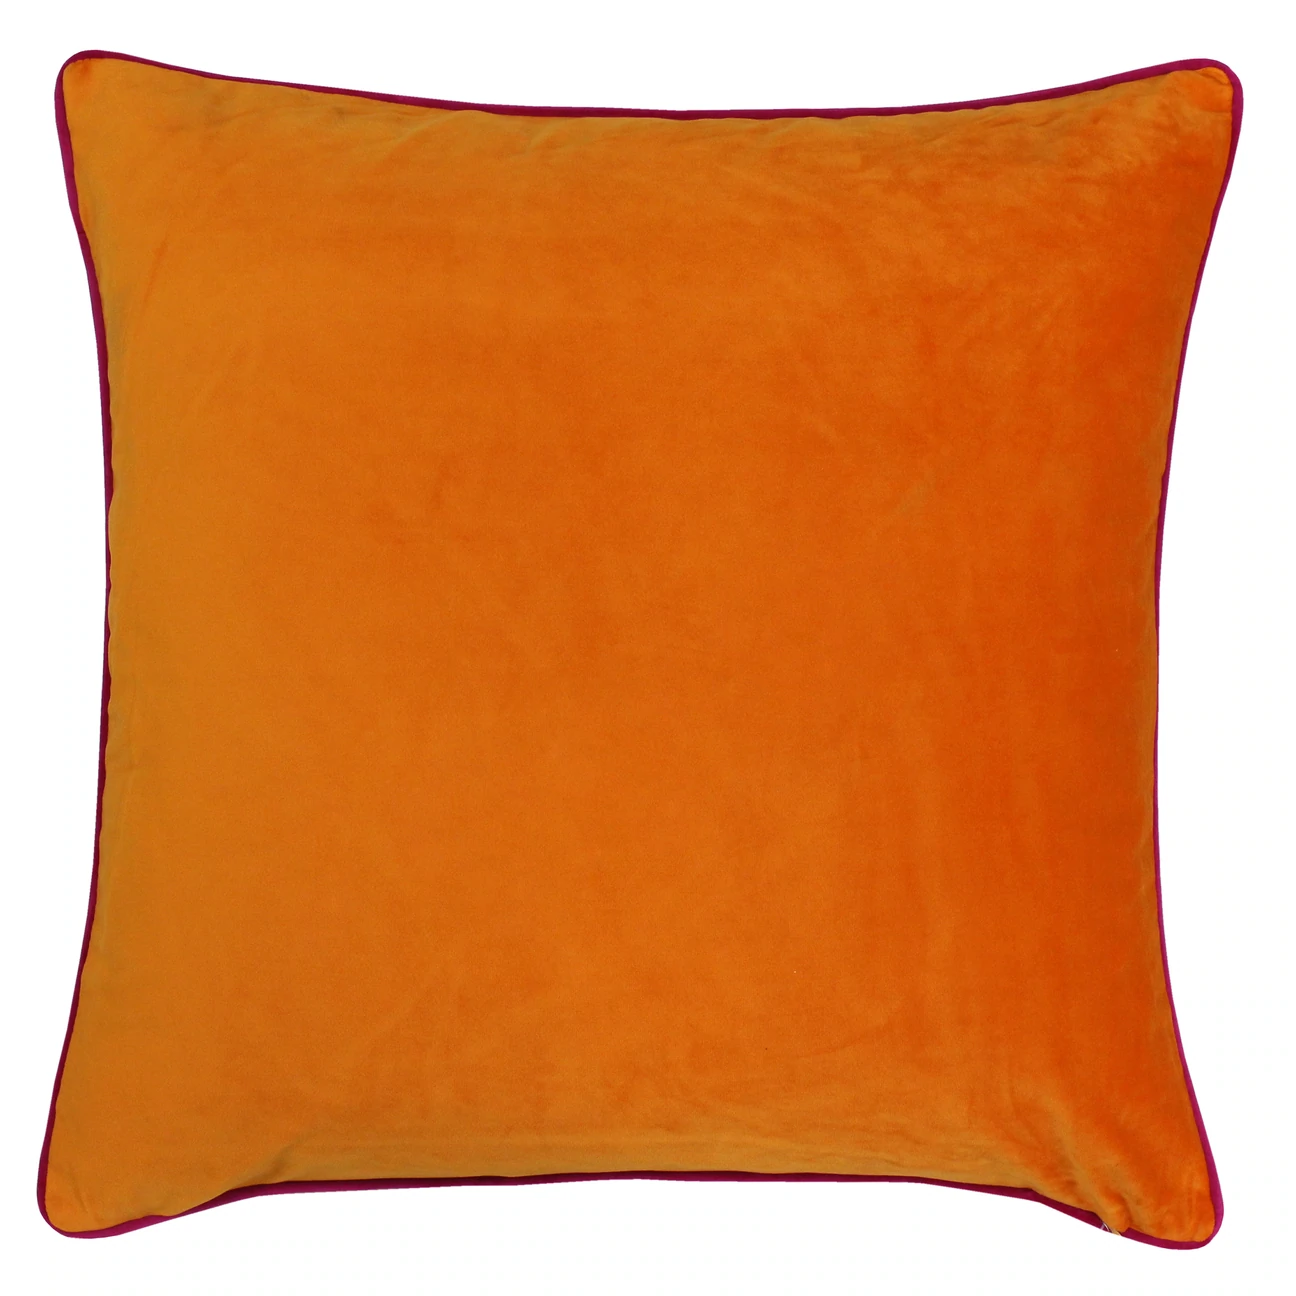 Victoria & Co. Orange Cushion With Pink Piping 55x55cm